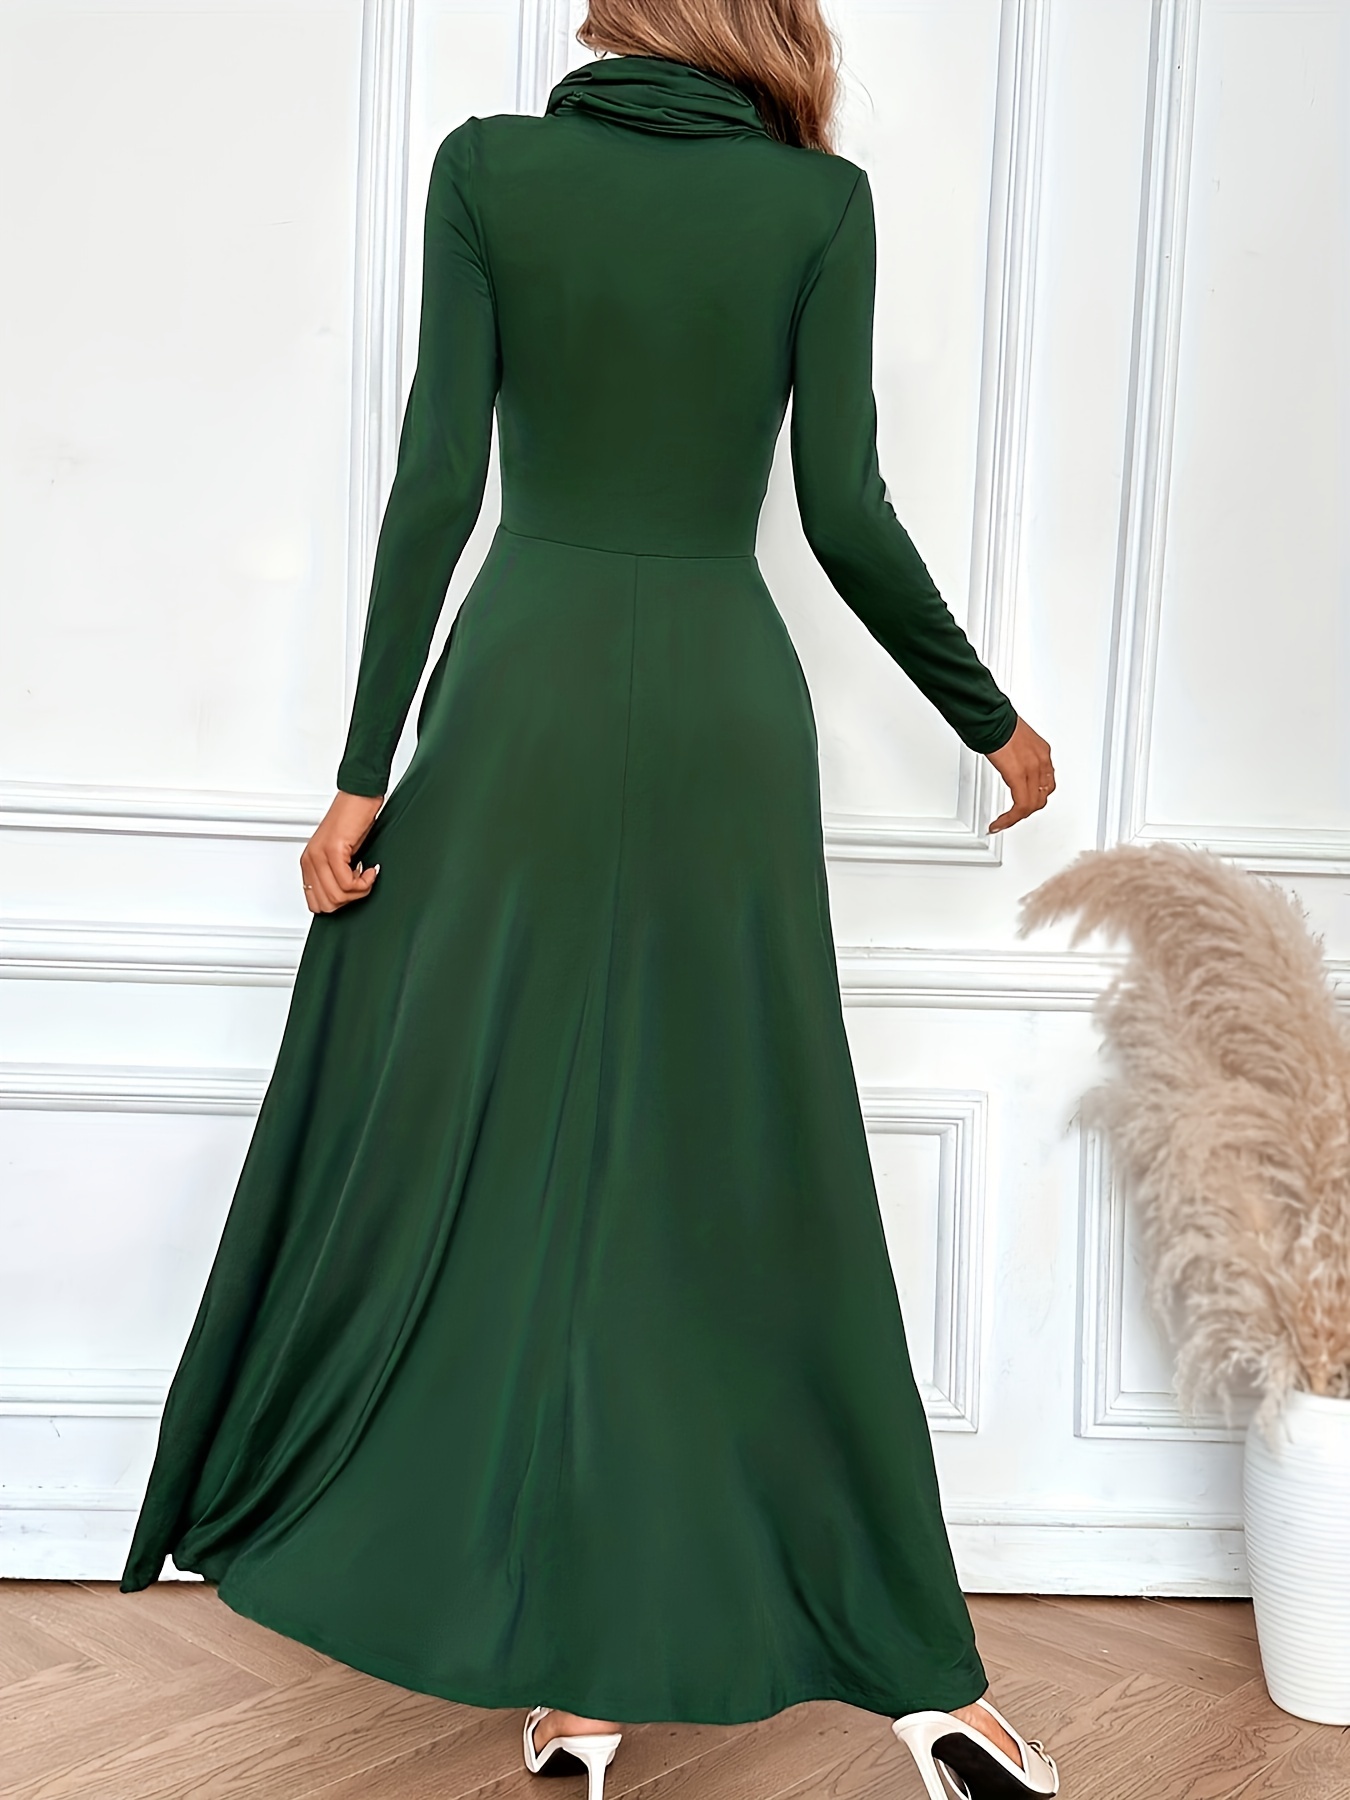 Solid Cowl Neck Dress、Elegant Long Sleeve Party Maxi Dress、Womens Clothing